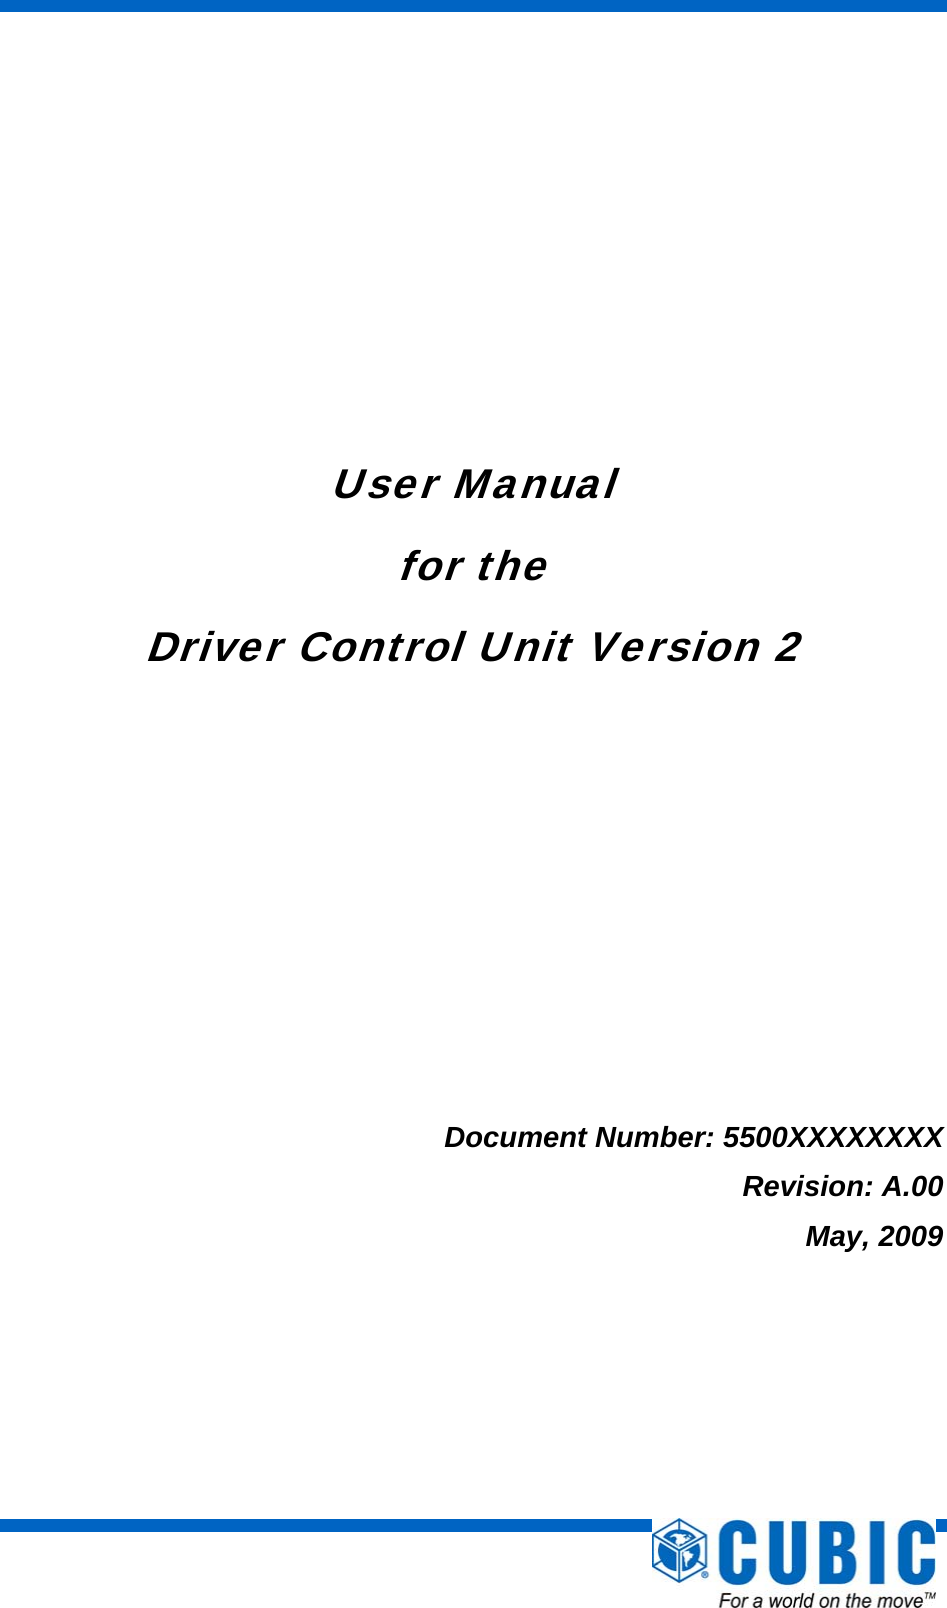               User Manual for the Driver Control Unit Version 2         Document Number: 5500XXXXXXXX Revision: A.00 May, 2009  